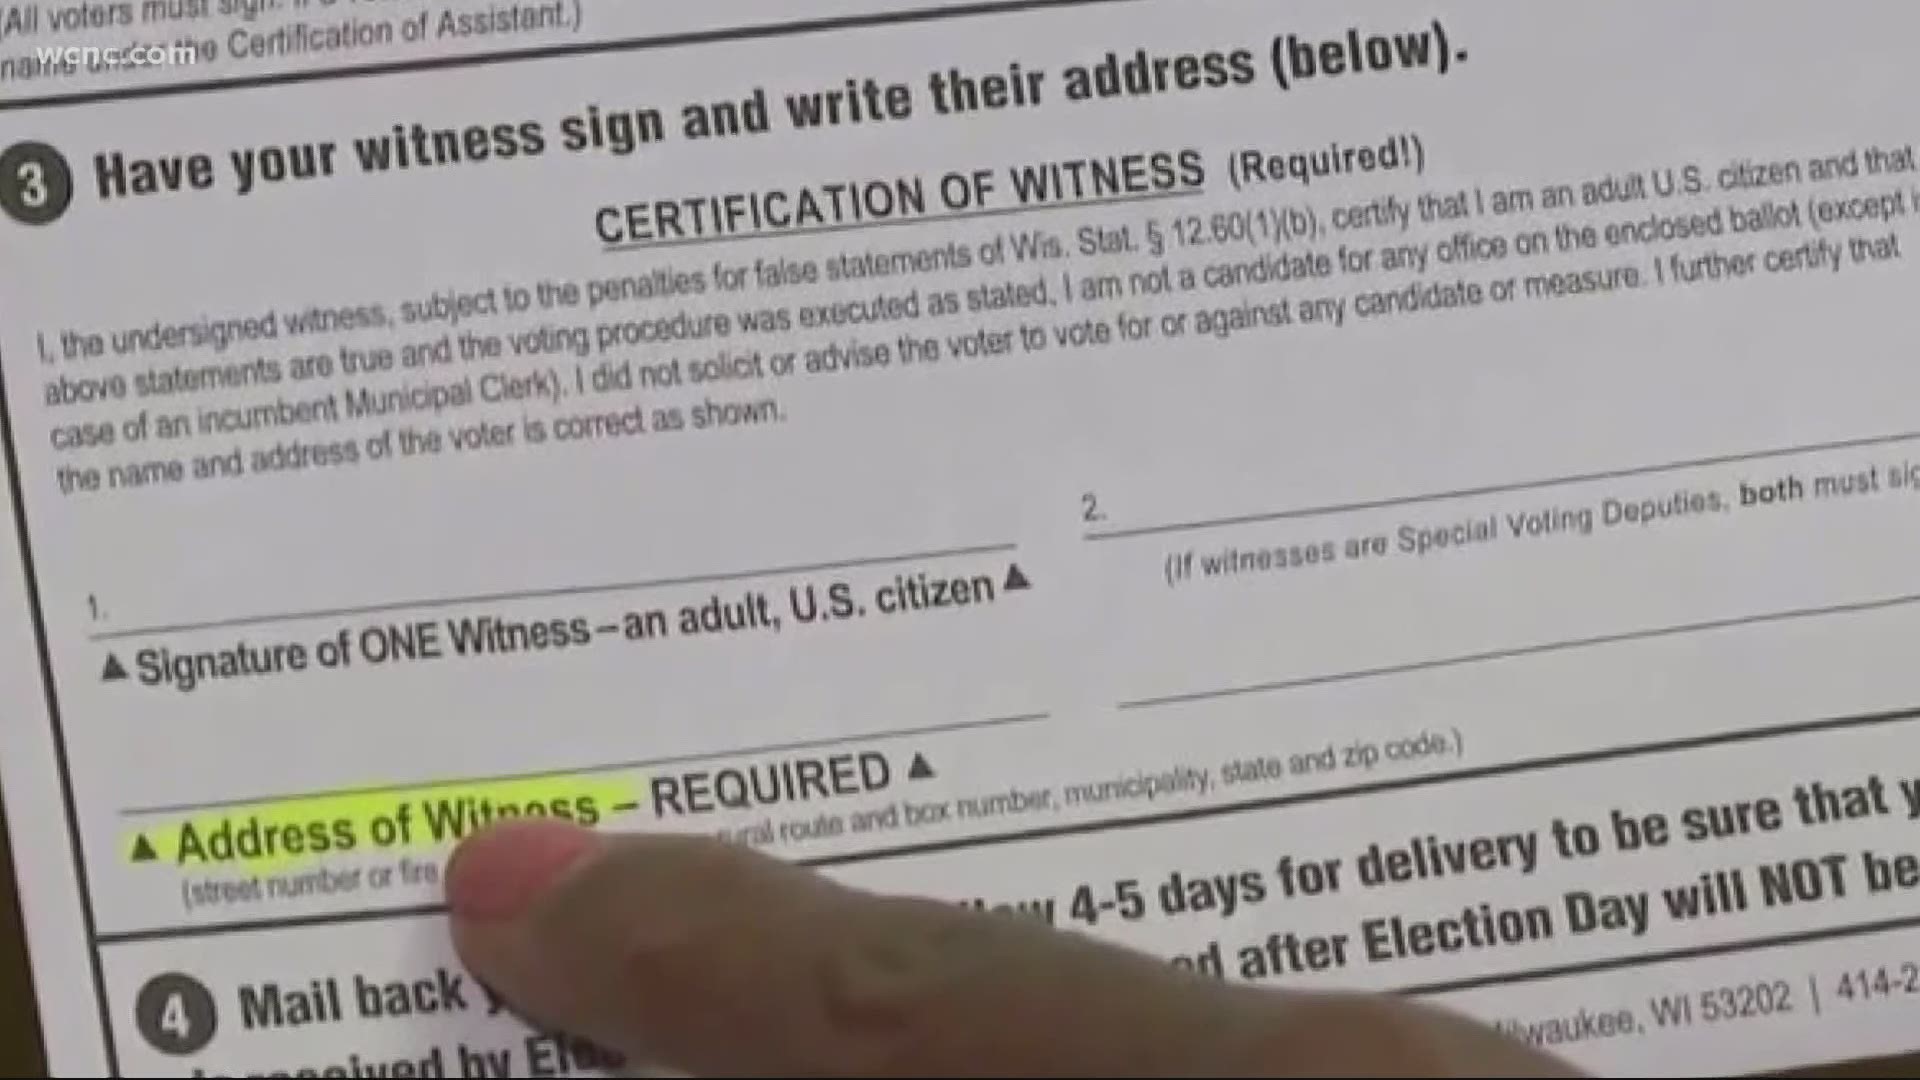 North Carolina election officials say they will mail a new absentee ballot to any voter who has sent one in without a witness signature on it.